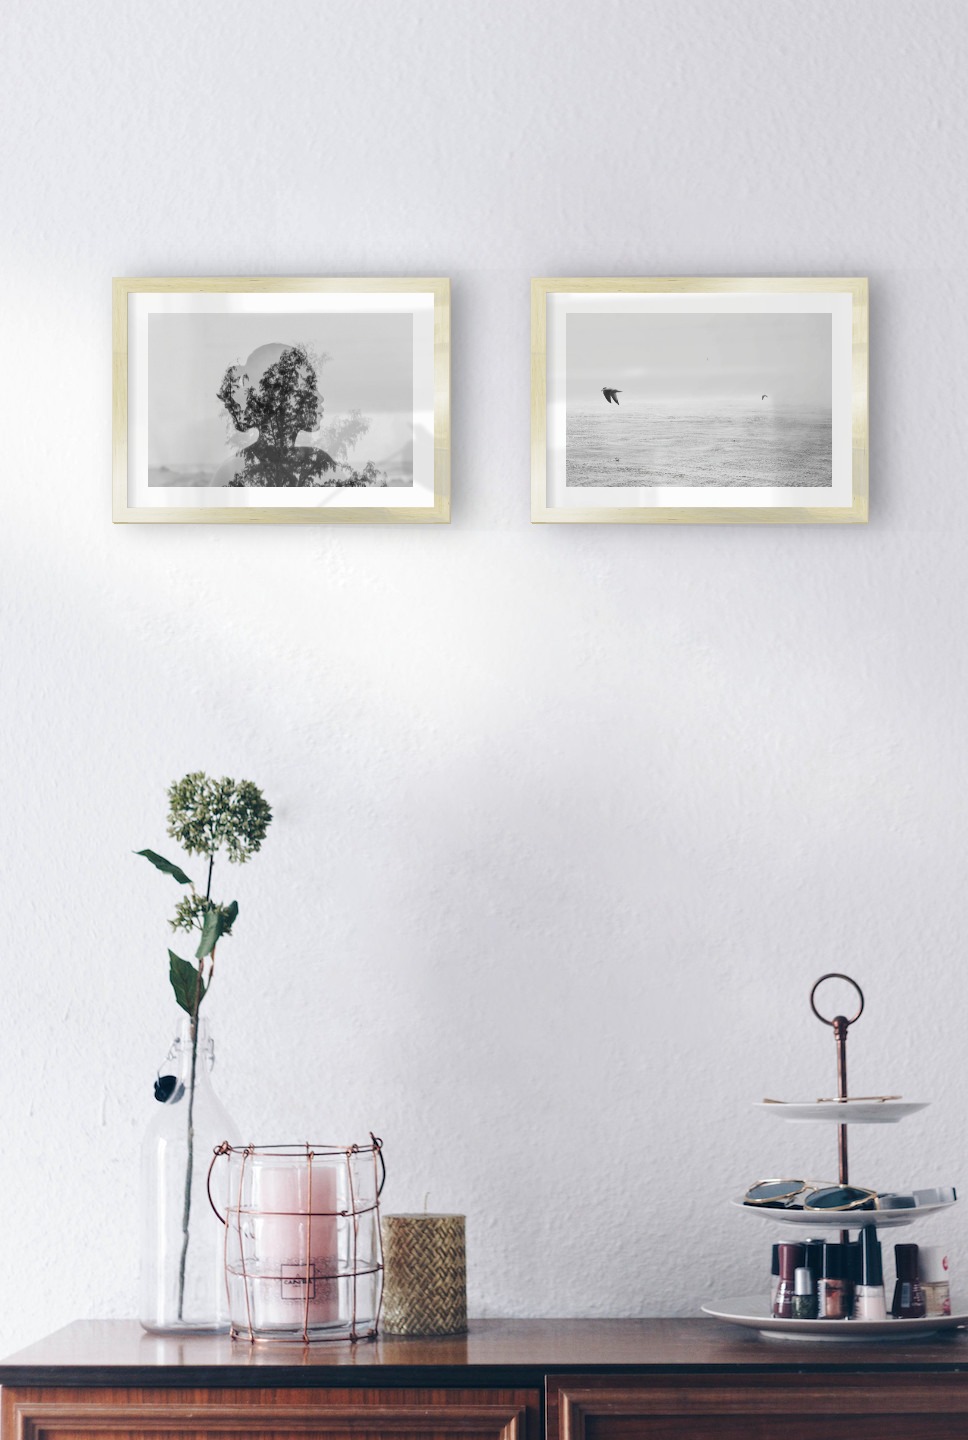 Gallery wall with picture frames in gold in sizes 21x30 with prints "Trees and silhouette" and "Birds over the sea"